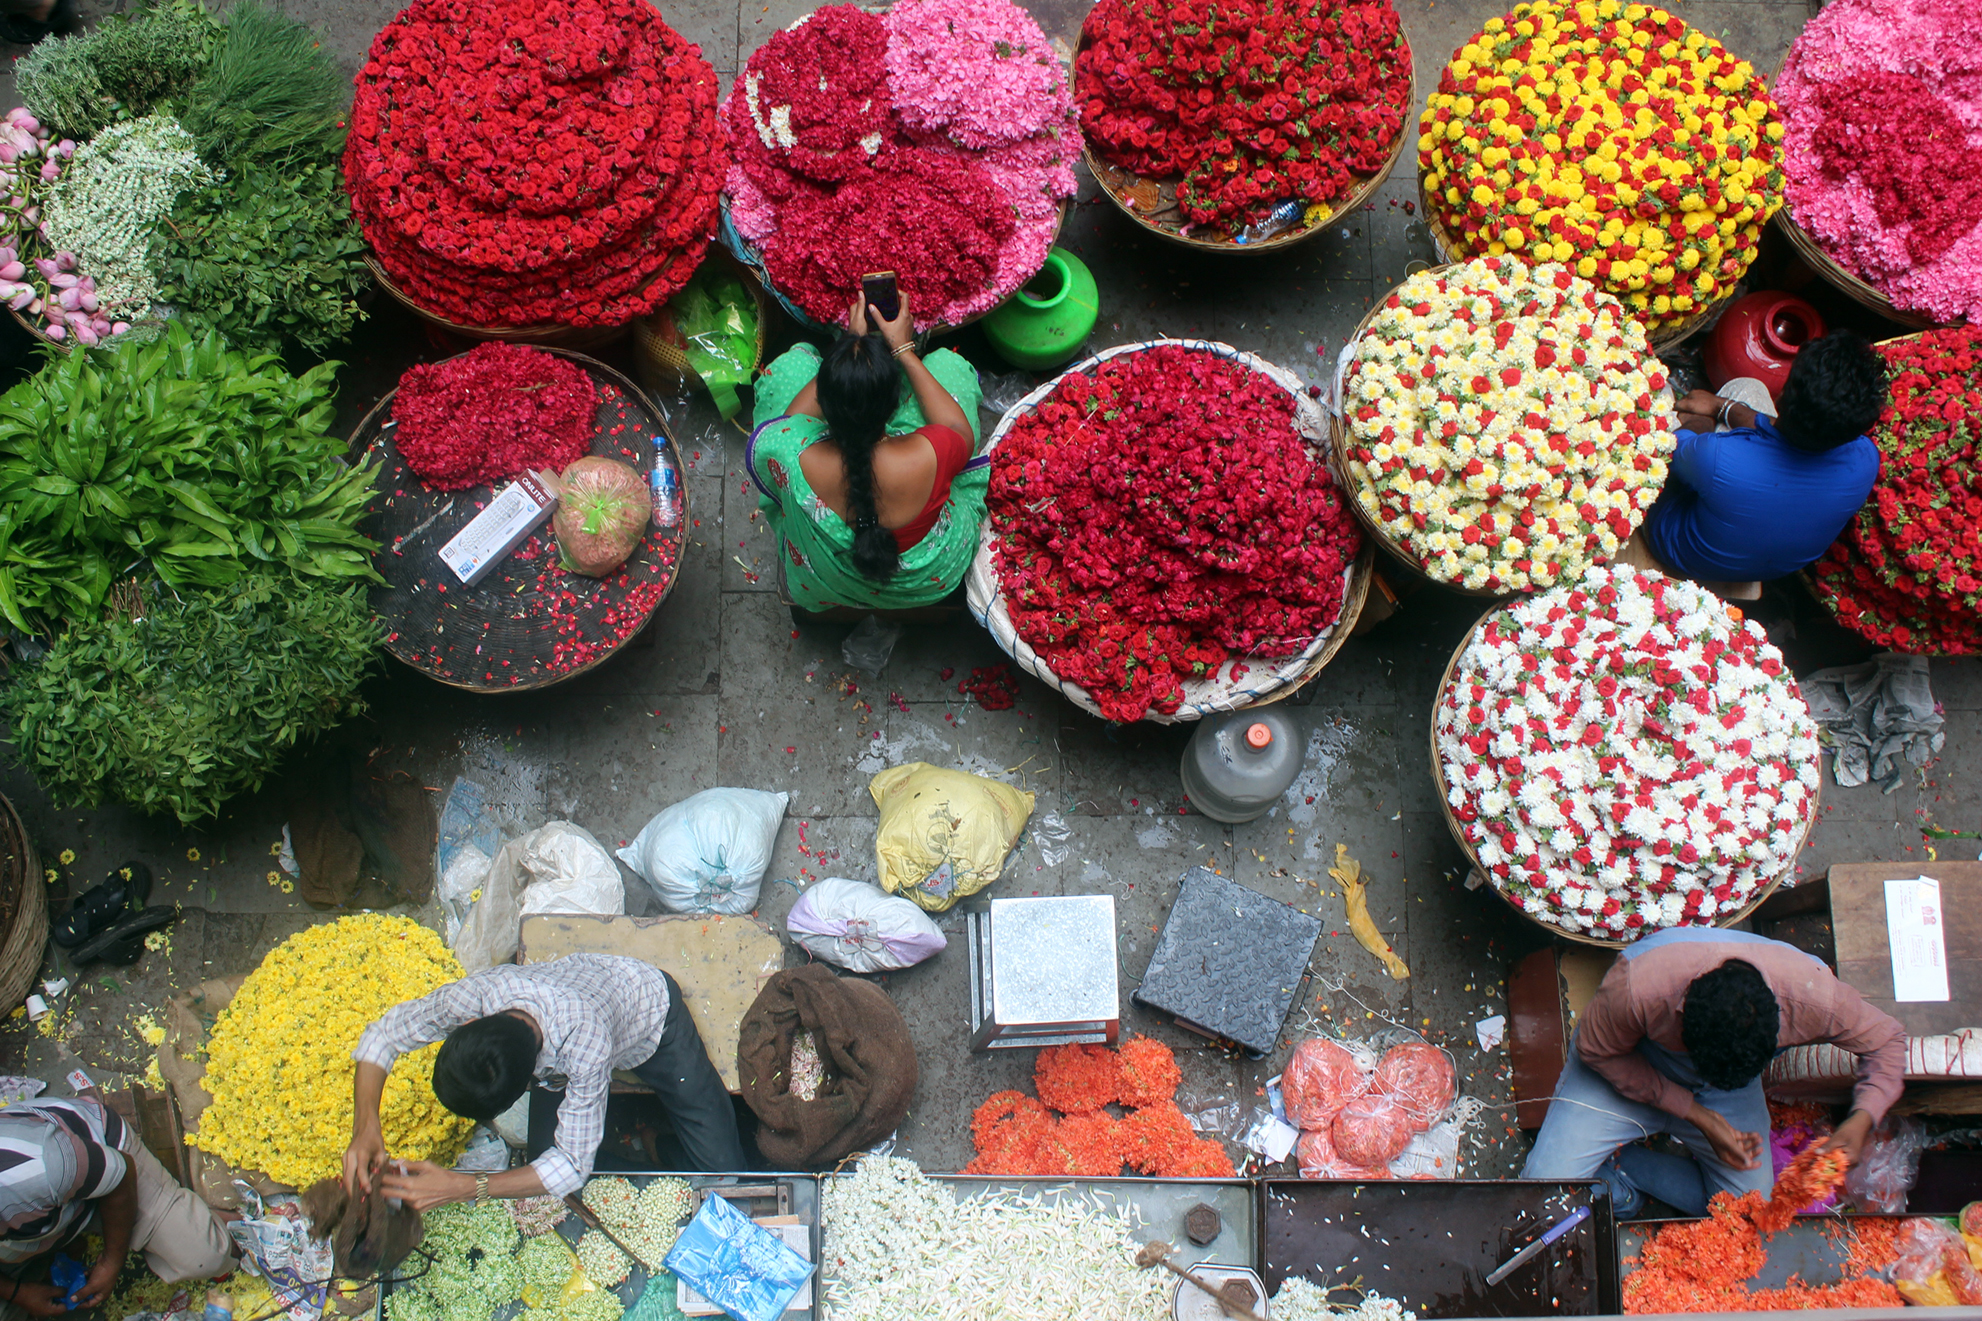 Looking down from above on people sorting flowers in a market